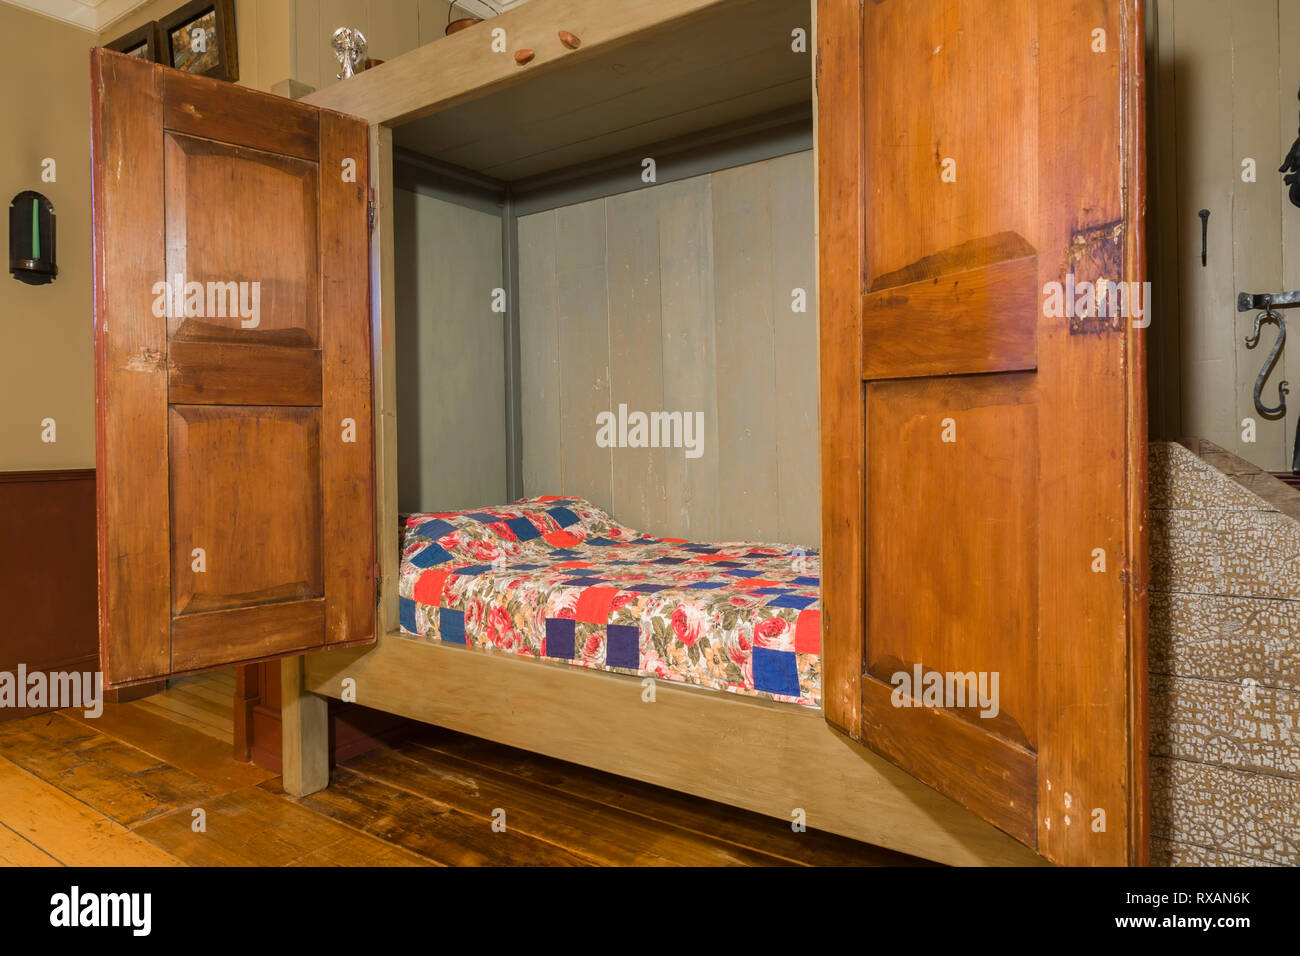 Single bed hidden in an old wooden armoire in the dining room inside an old circa 1805 Canadiana cottage style home, Quebec, Canada. This image is property released. CUPR0323 Stock Photo